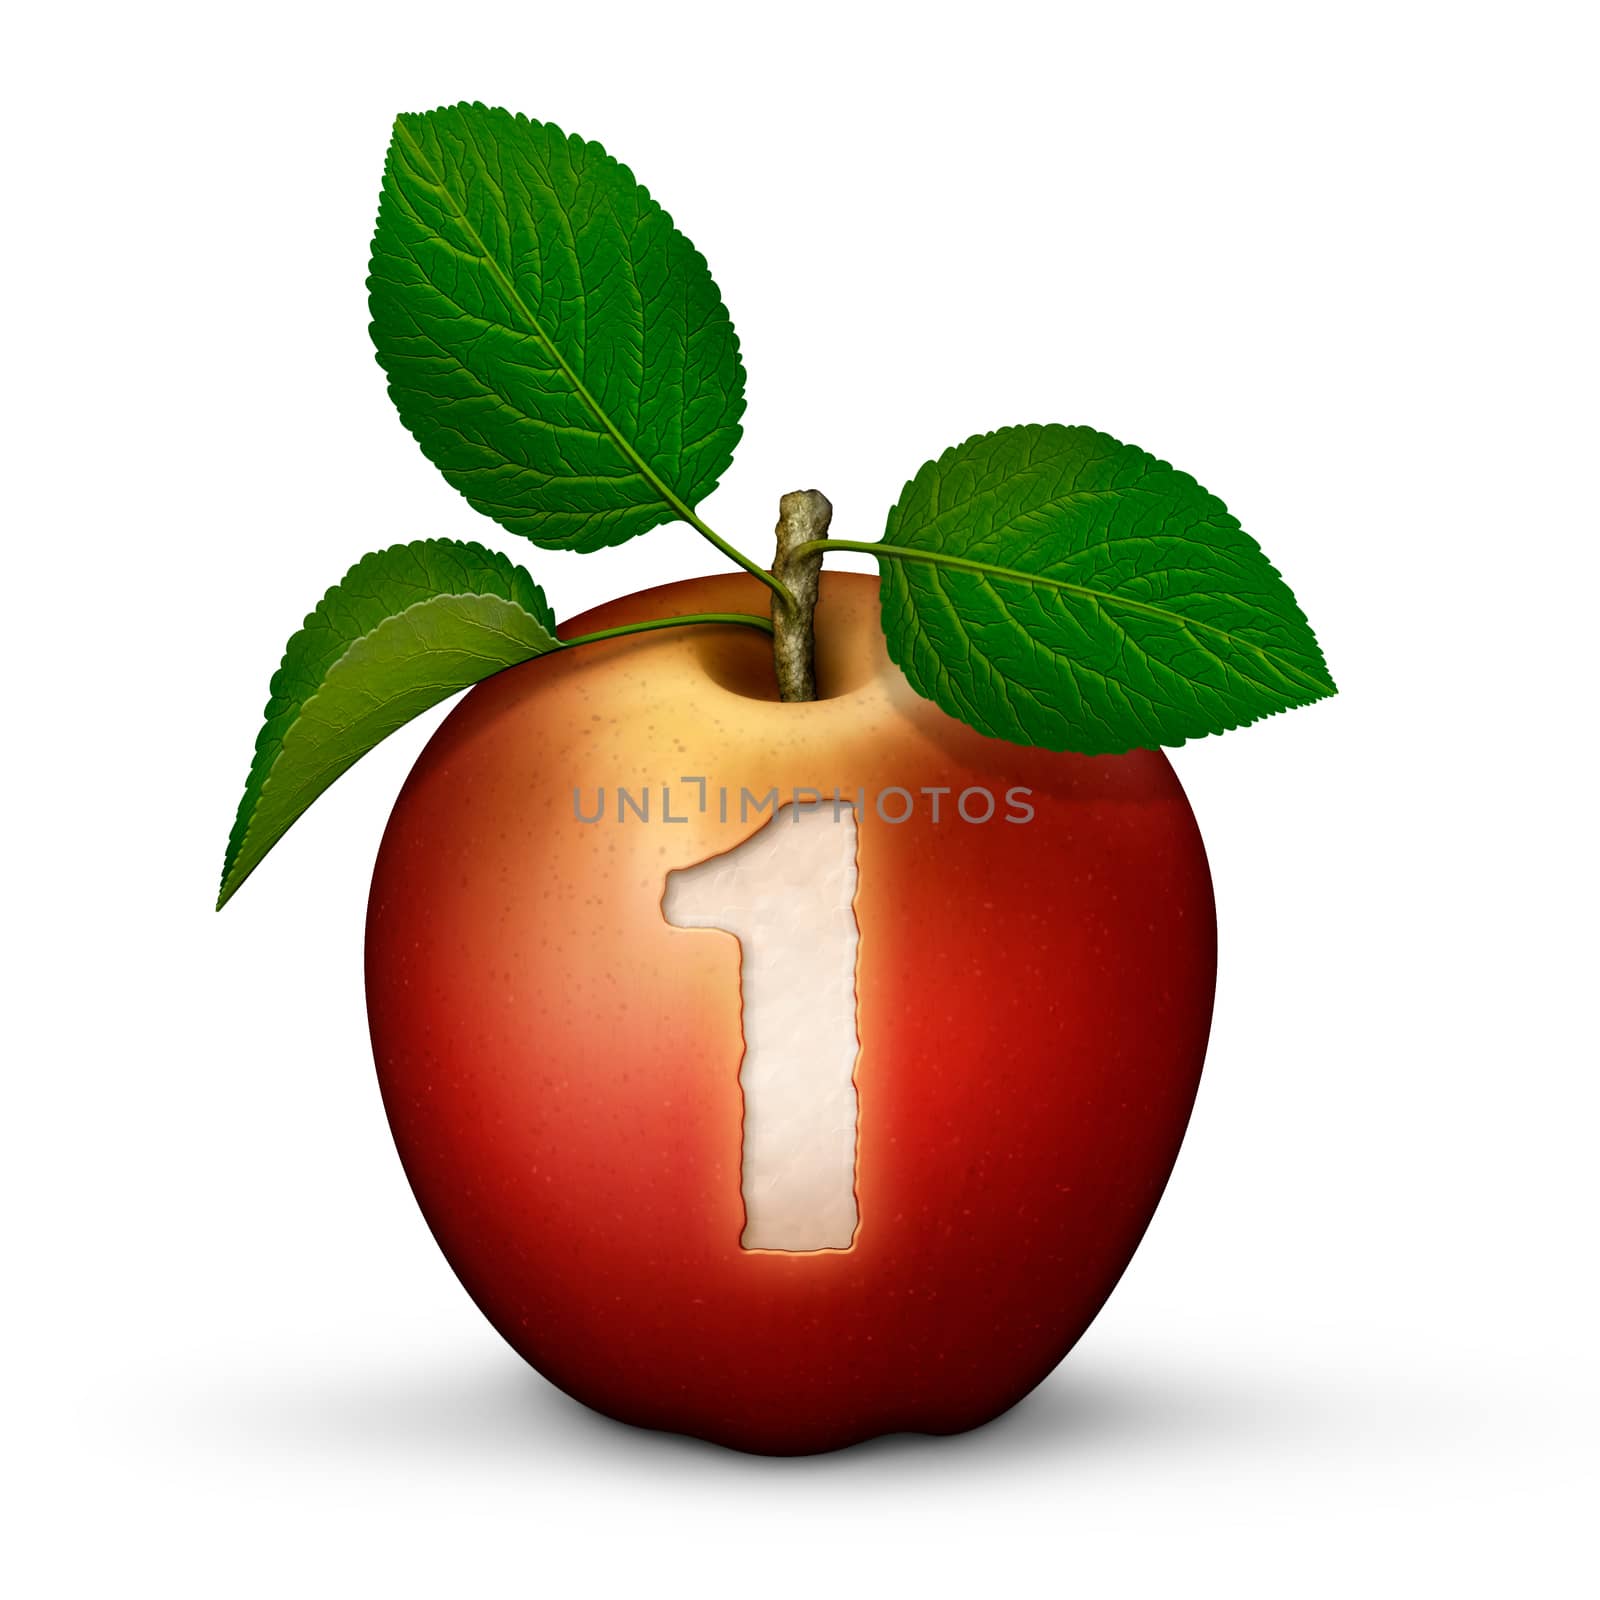 3D illustration of an apple with the number 1 bitten out of it.